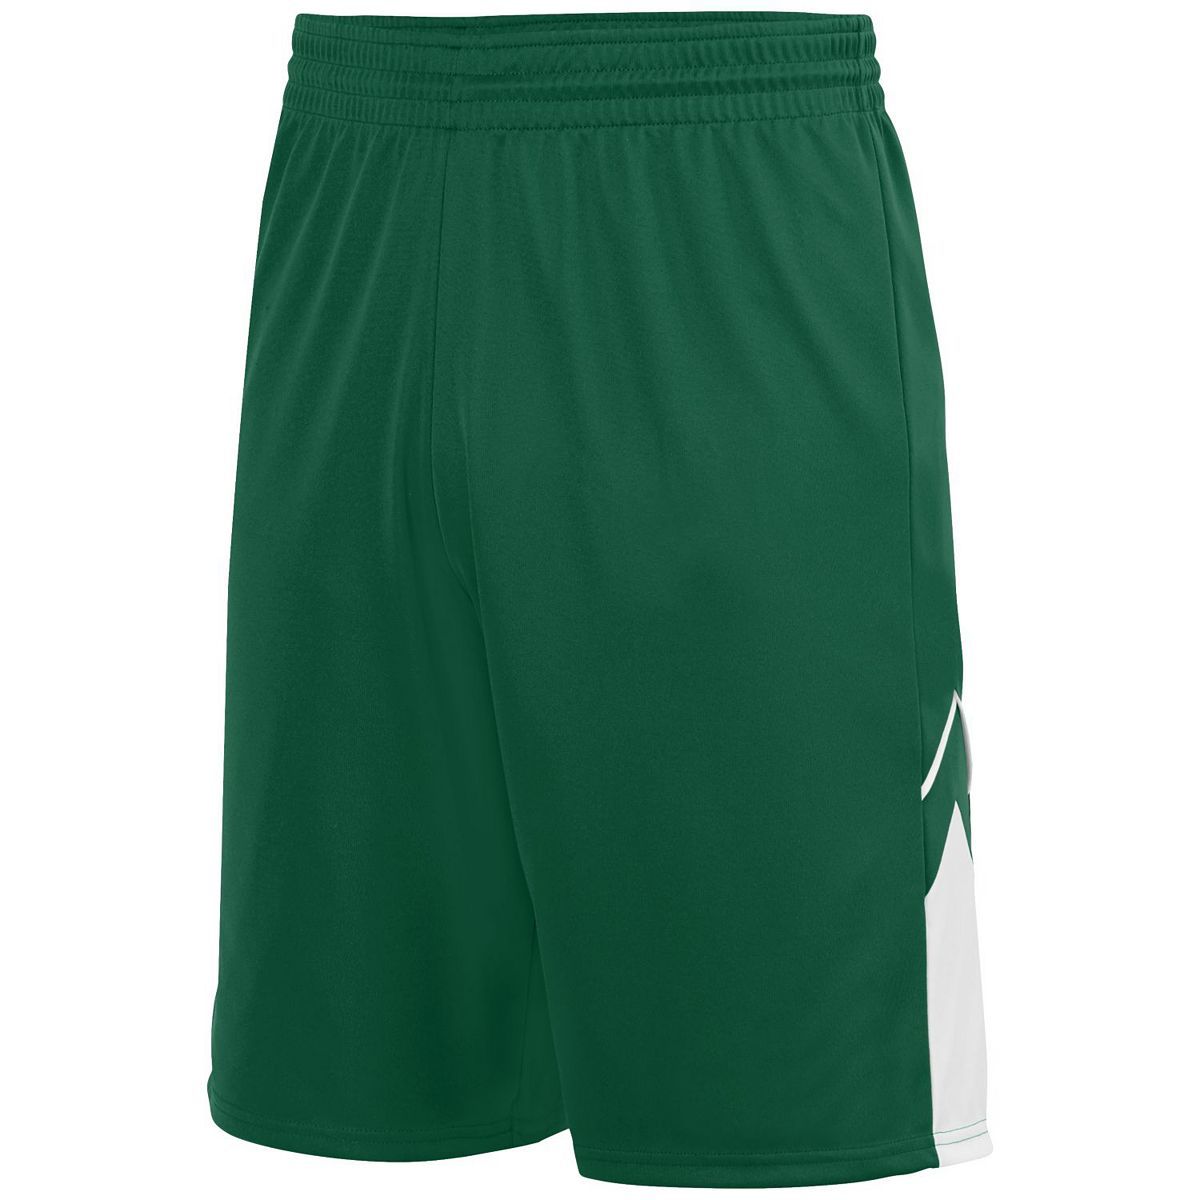 Augusta Sportswear Alley-Oop Reversible Shorts in Dark Green/White  -Part of the Adult, Adult-Shorts, Augusta-Products, Basketball, All-Sports, All-Sports-1 product lines at KanaleyCreations.com